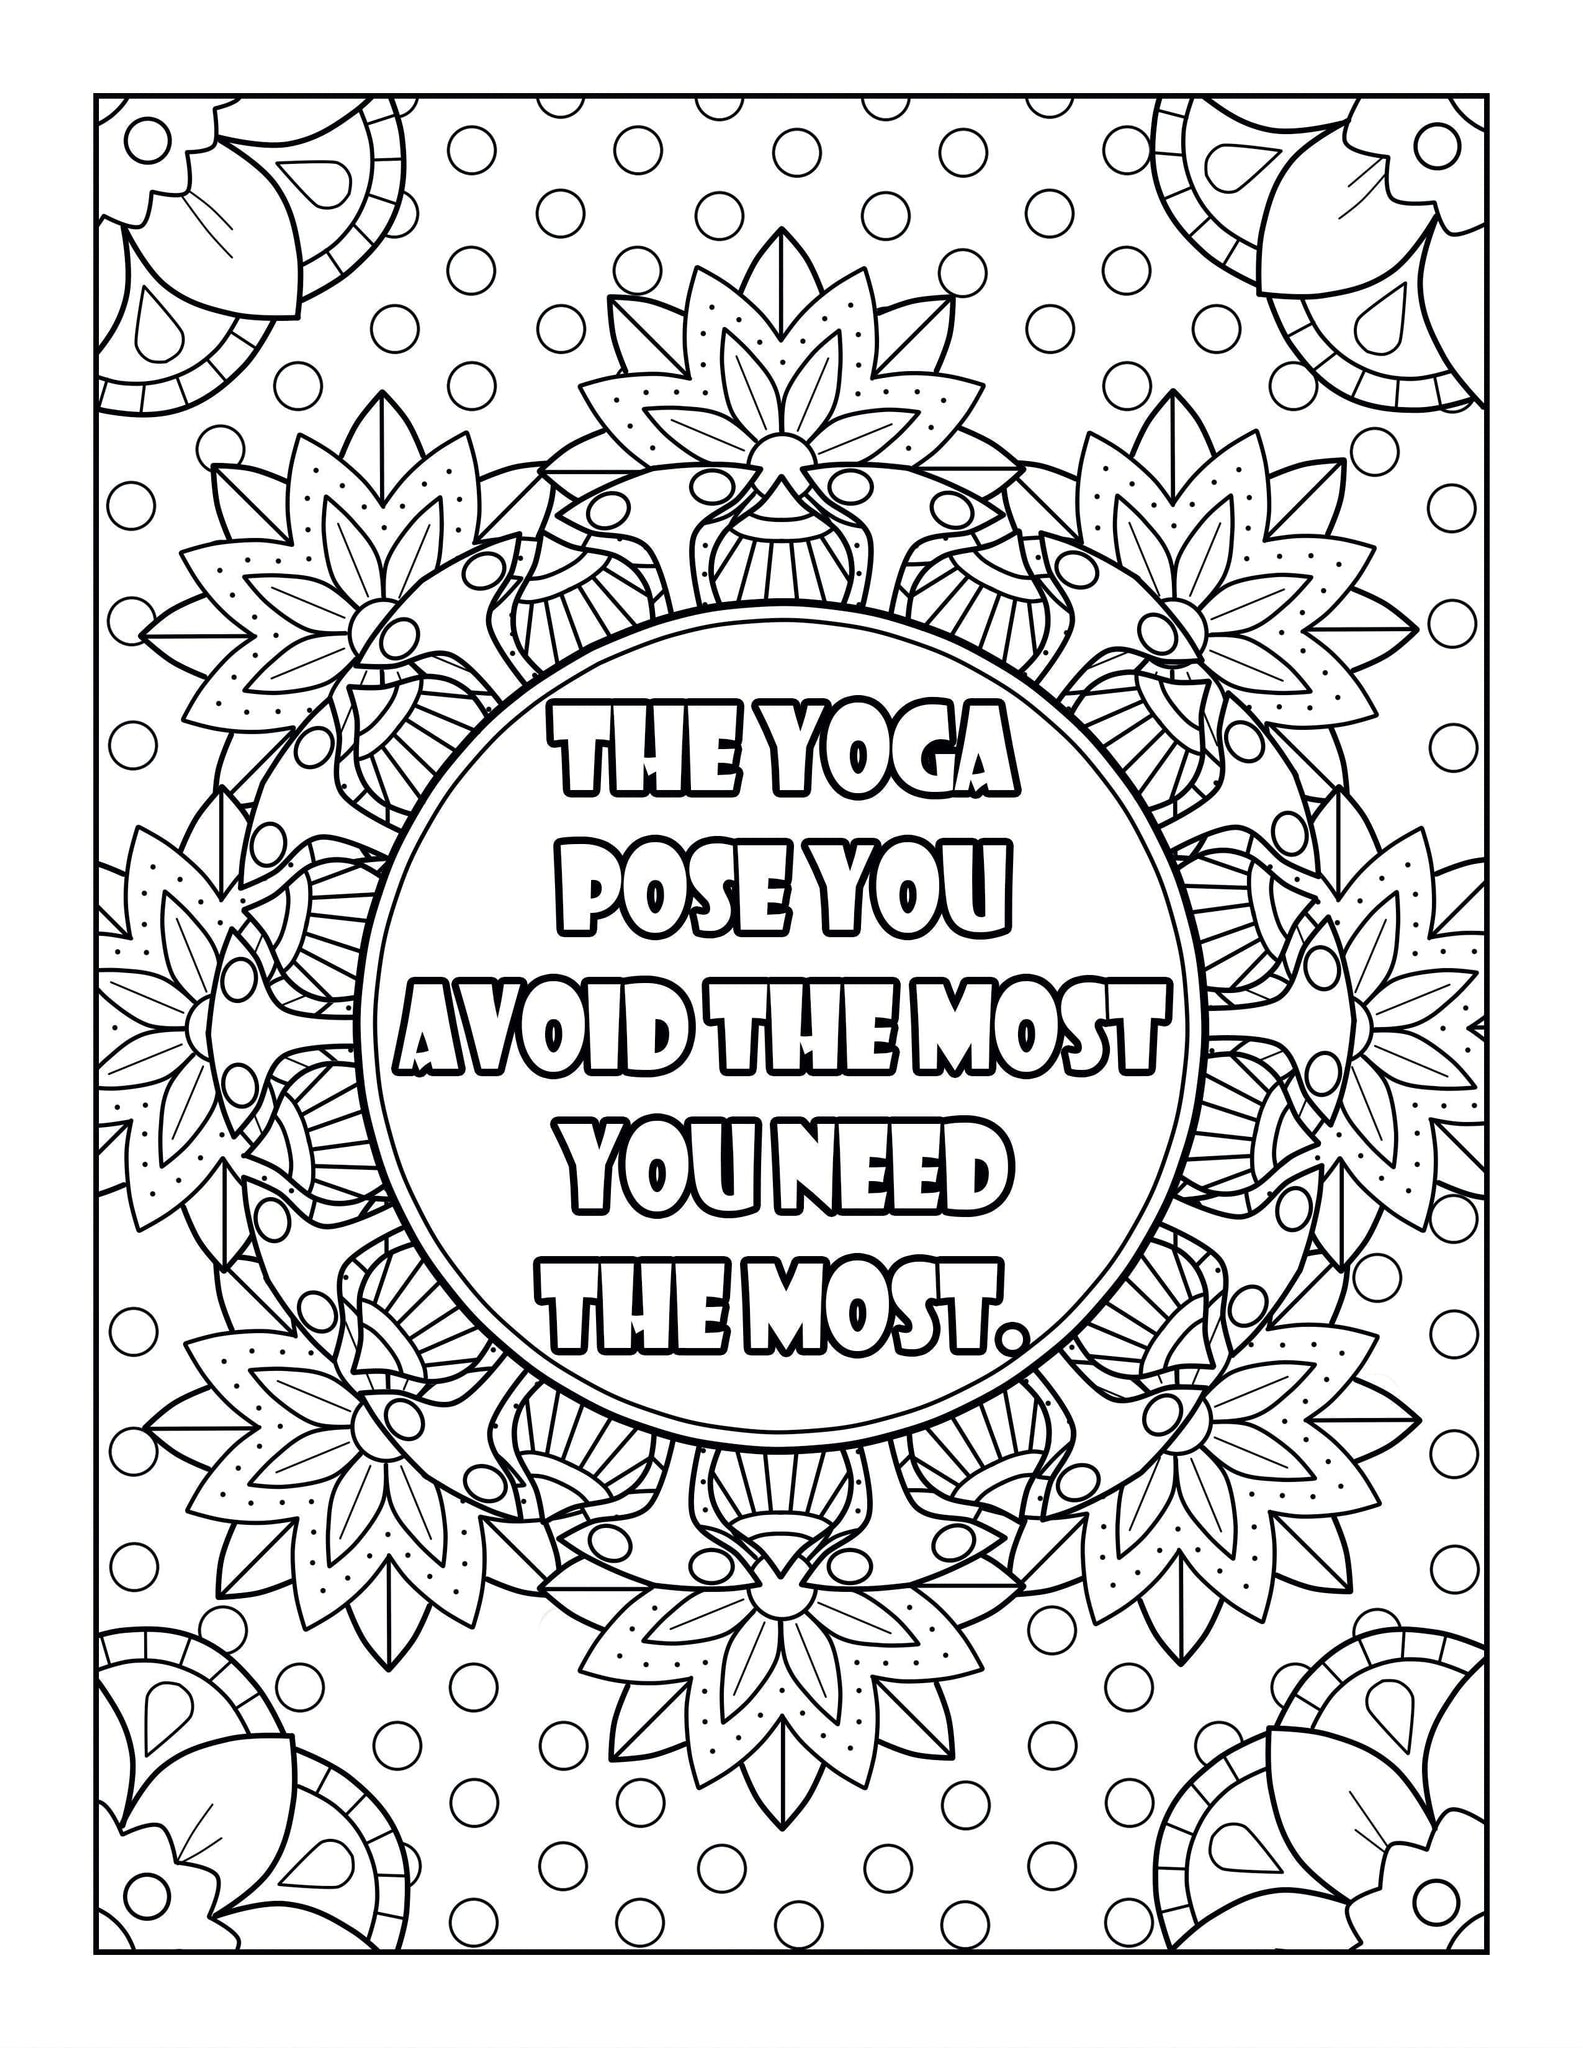 Aussie Childcare Network - 17 Free Yoga Colouring Pages The Yoga Colouring  Pages are for children to colour, paint, or collage. These are great for  children to observe the different types of